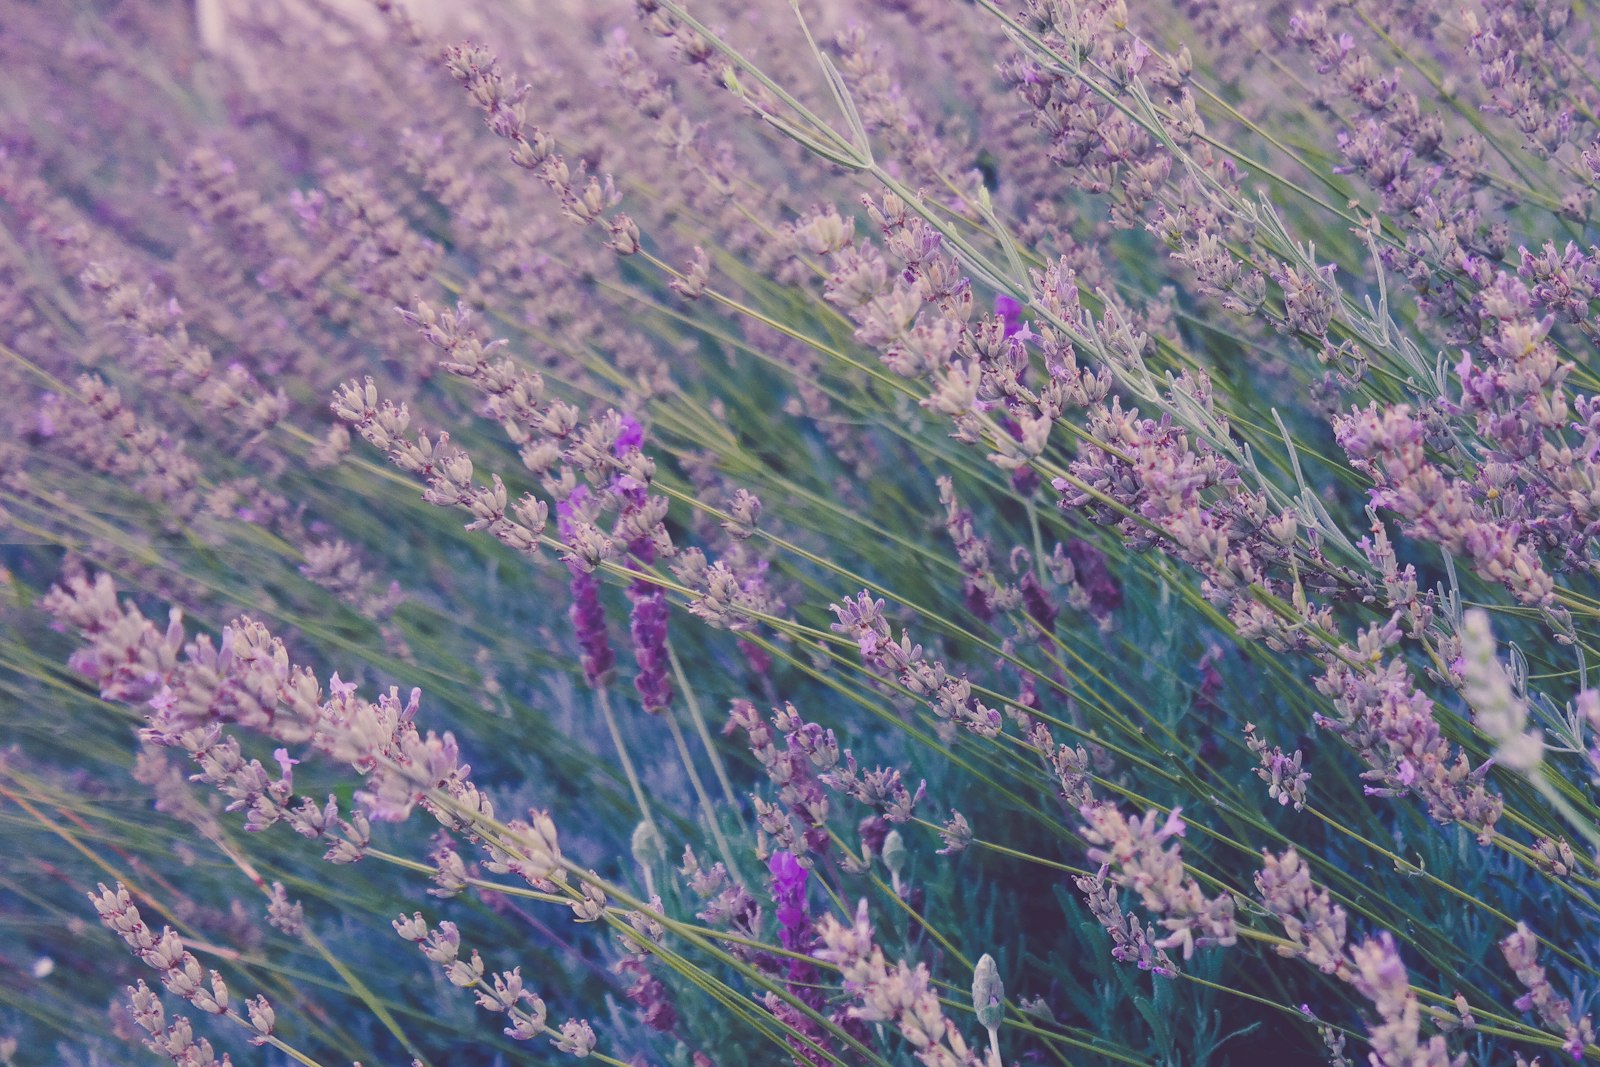 Samsung NX300 sample photo. Field of lavender plants photography